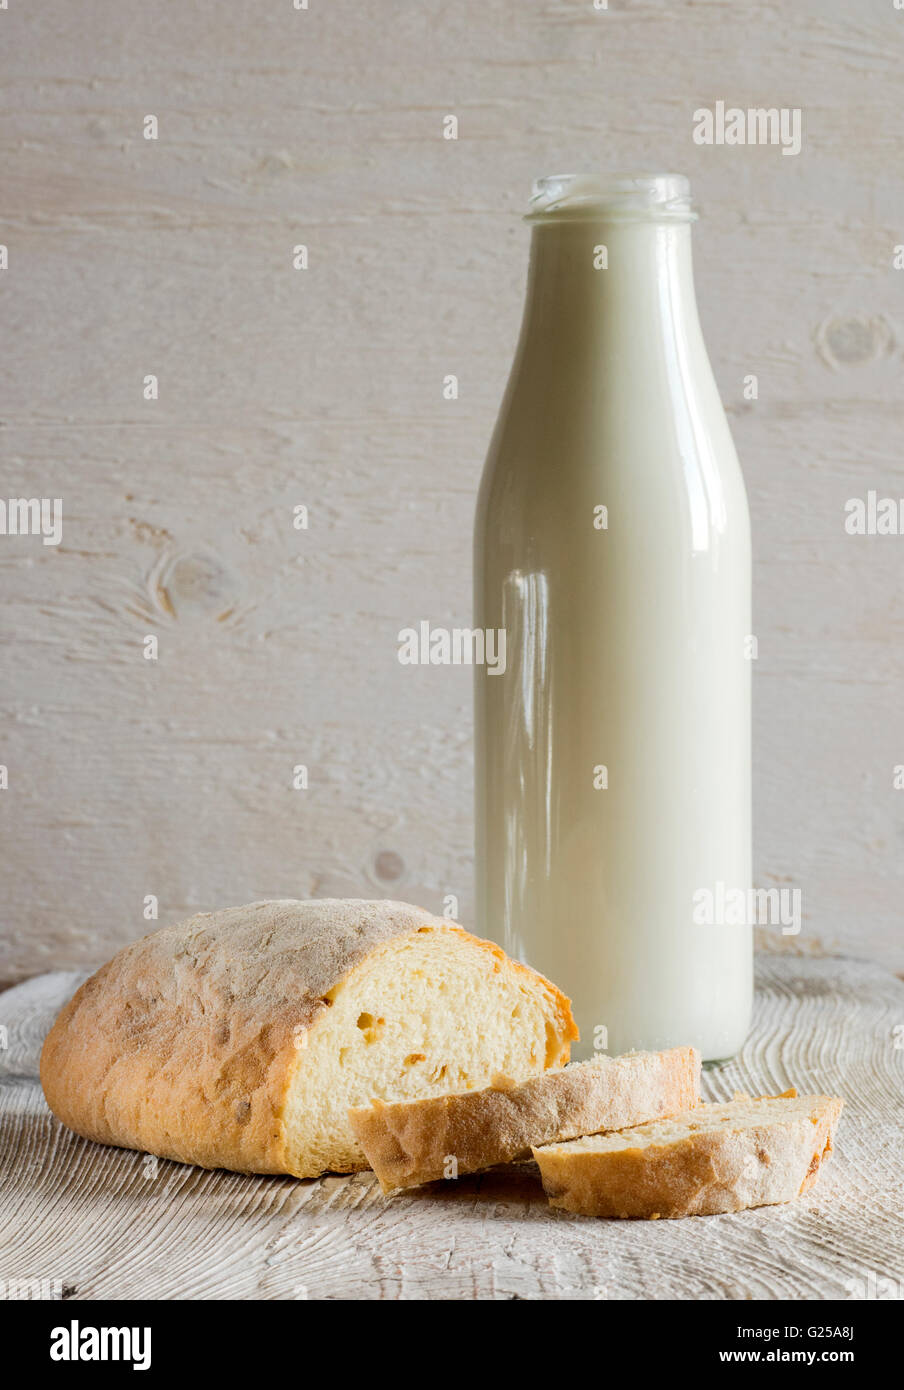 Bottle of milk and loaf of wholemeal bread Stock Photo